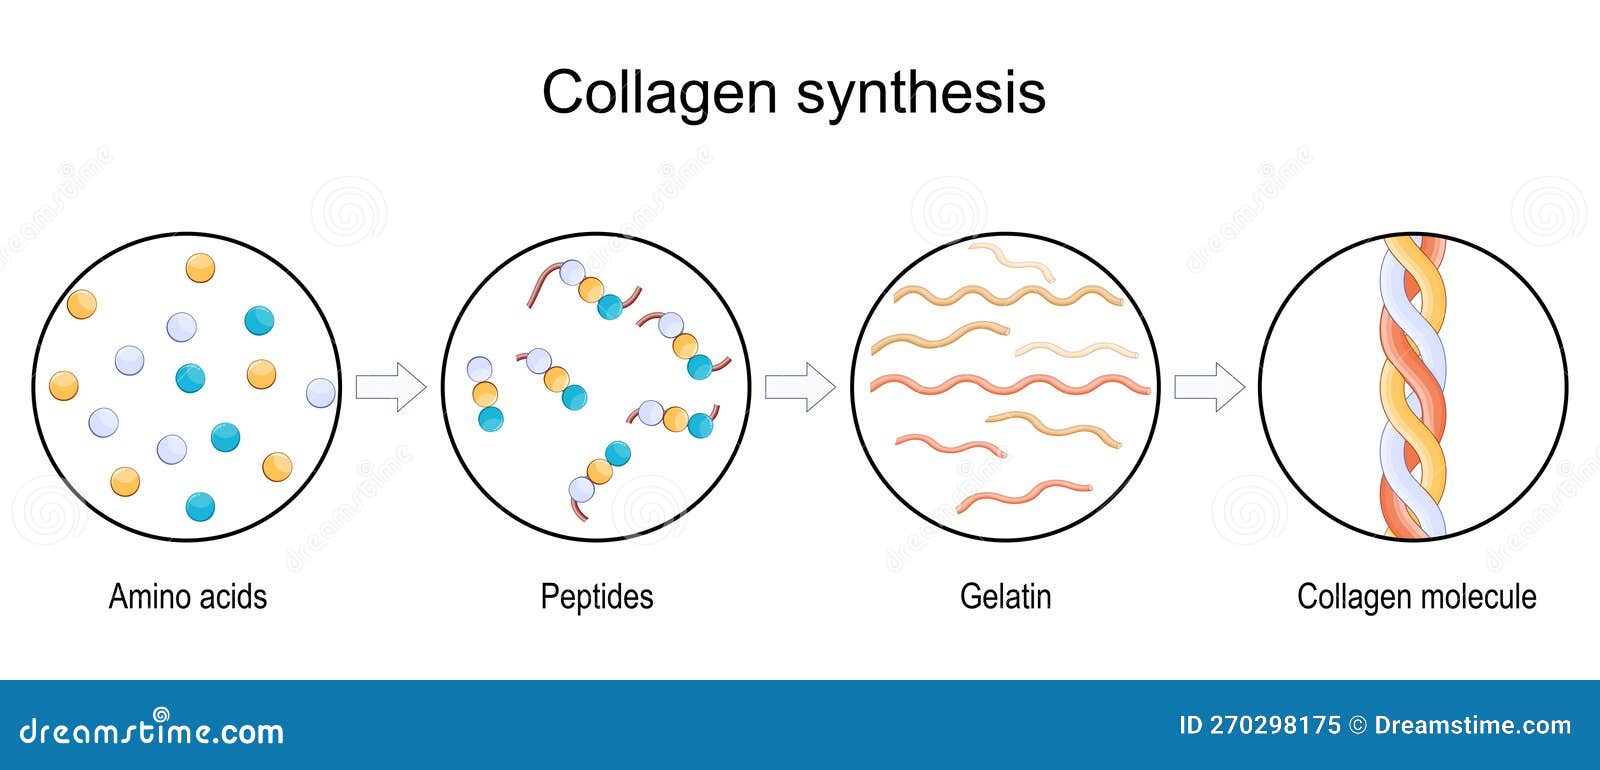 collagen synthesis. from amino acids and peptides, to gelatin and collagen molecule